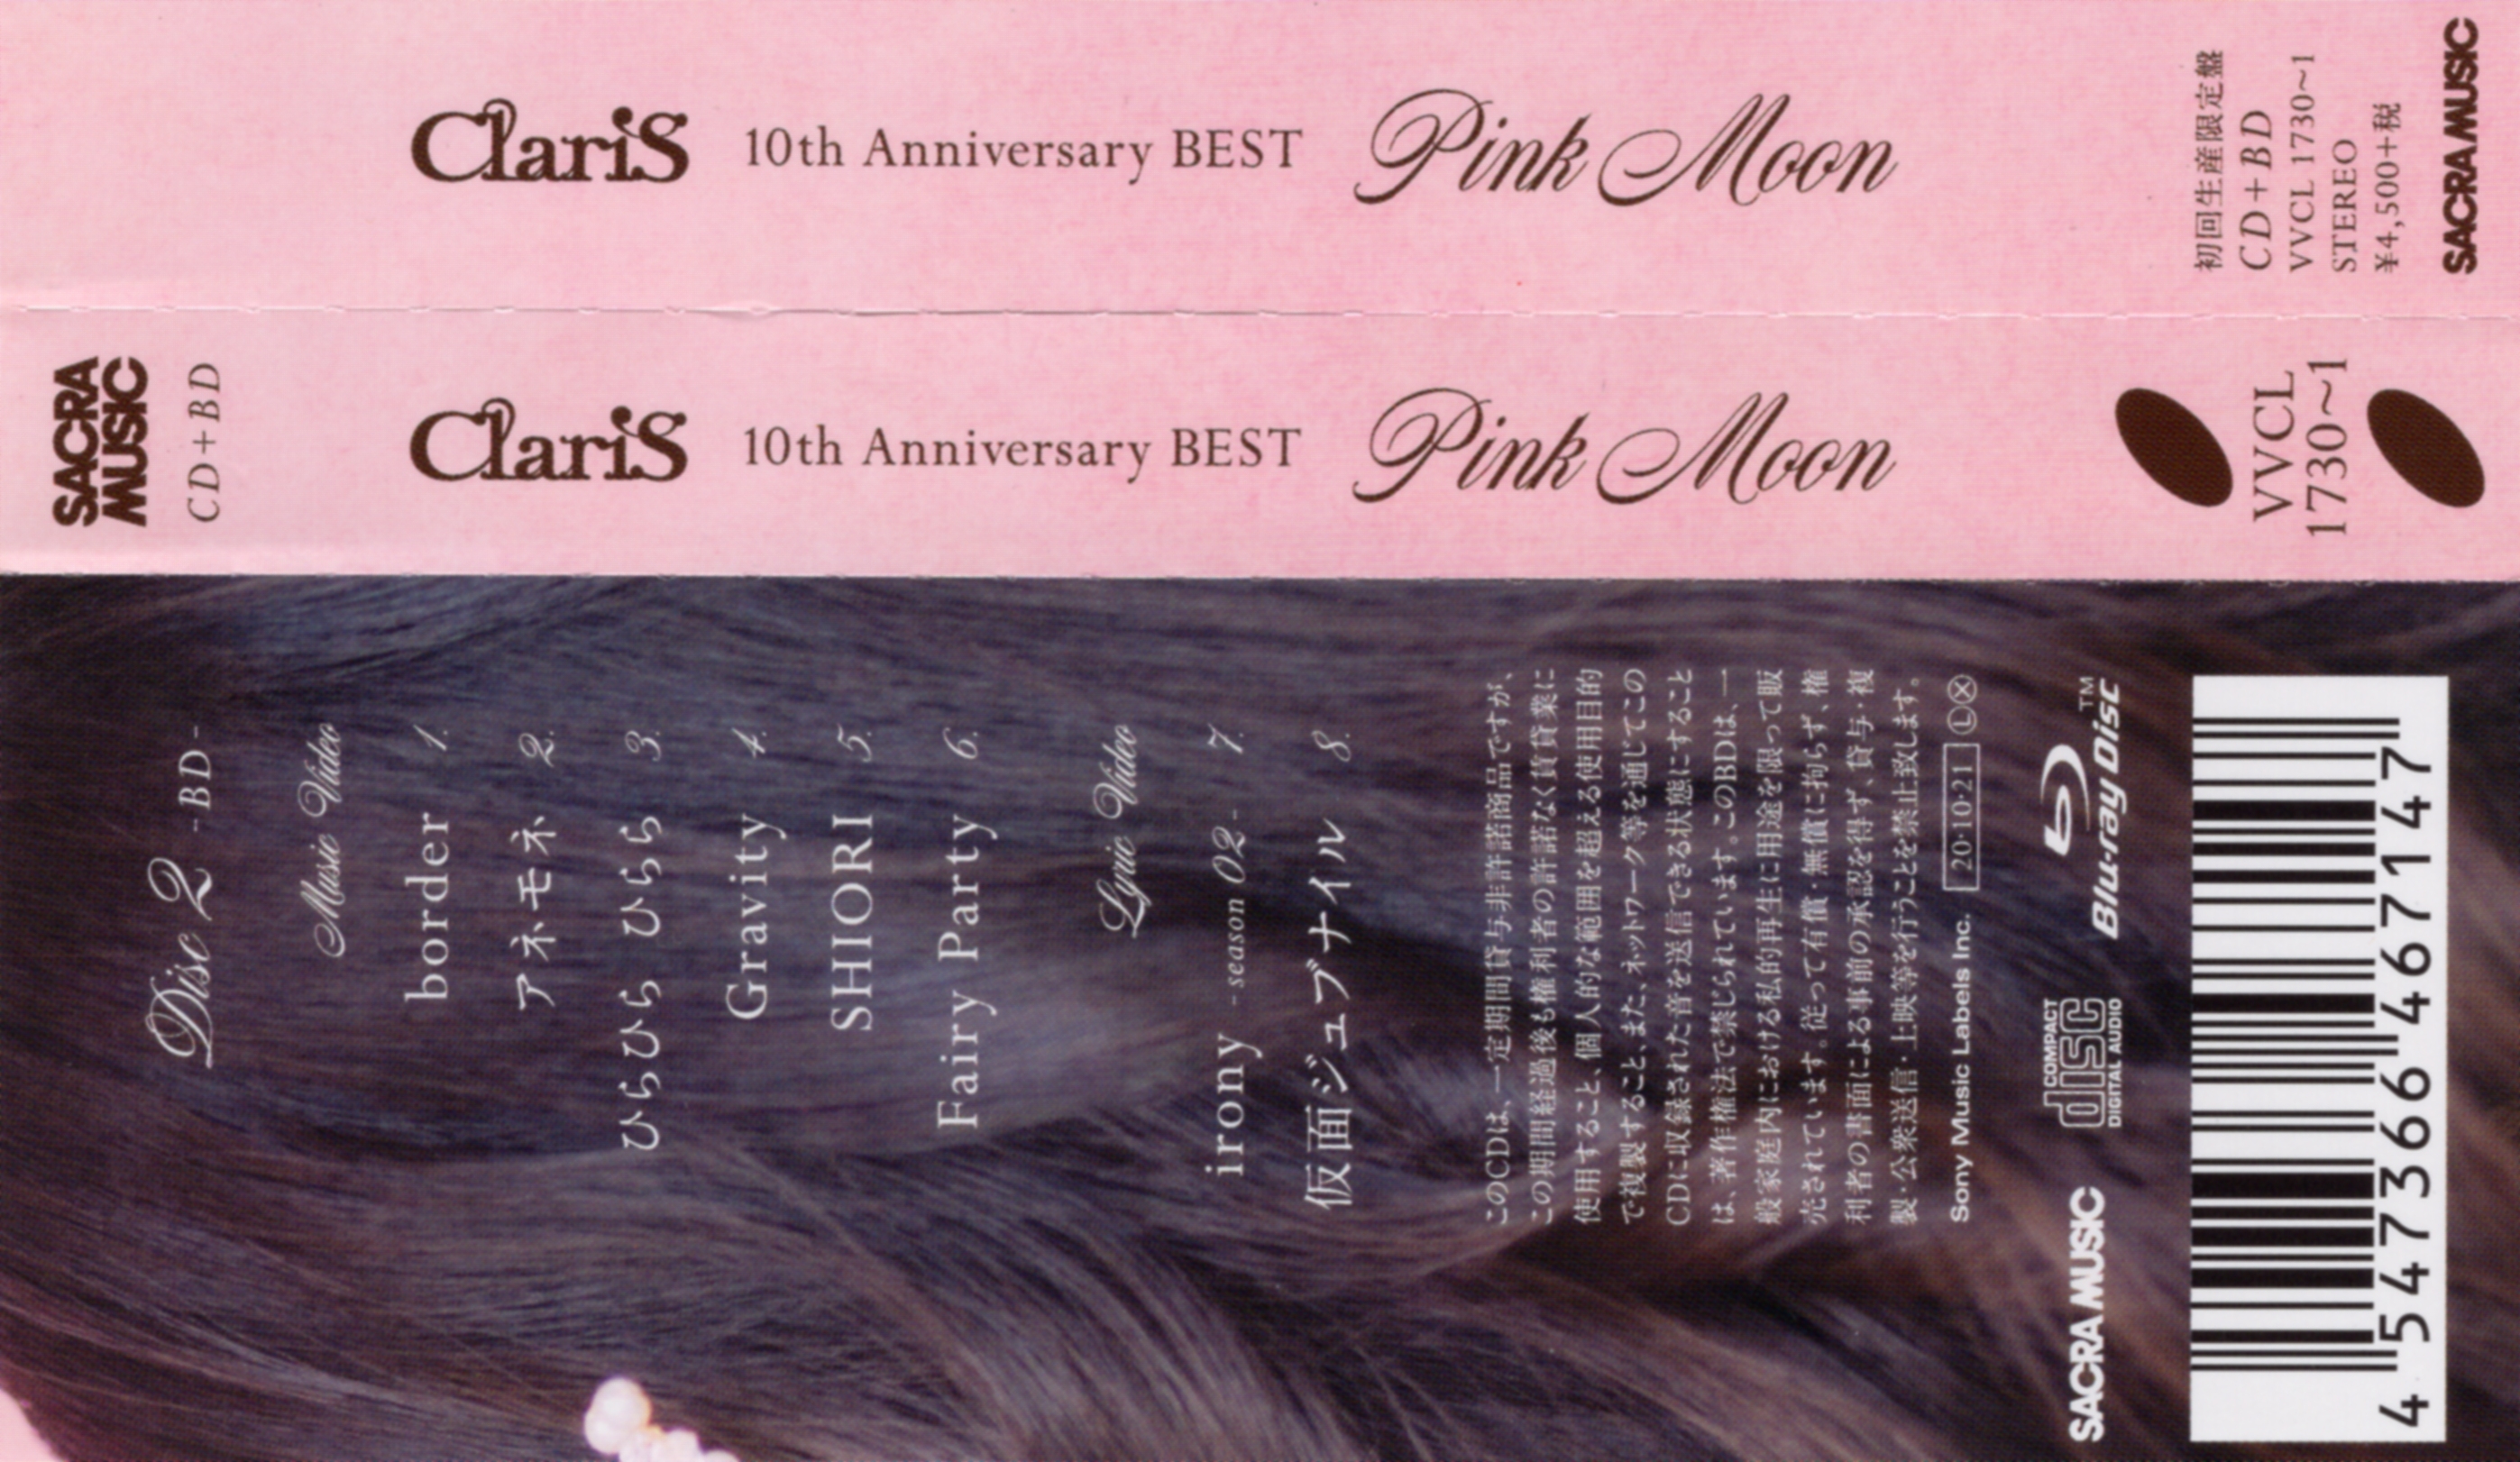 Release “ClariS 10th Anniversary BEST - Pink Moon -” by ClariS